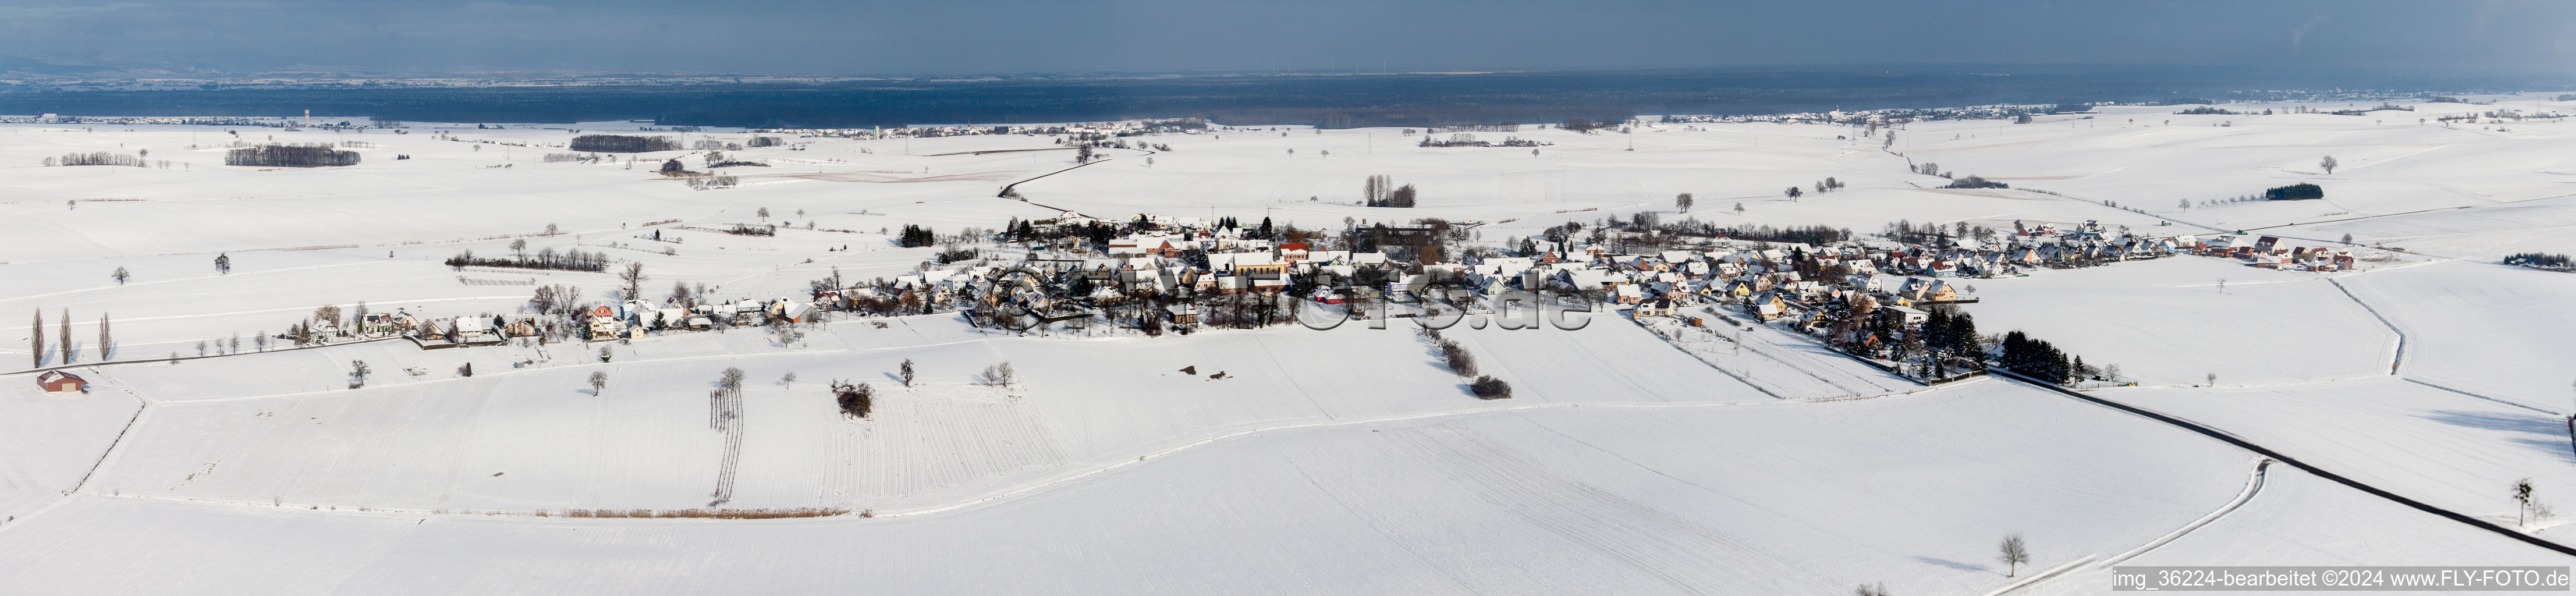 Wintry snowy Panoramic perspective Village - view on the edge of agricultural fields and farmland in Oberlauterbach in Grand Est, France